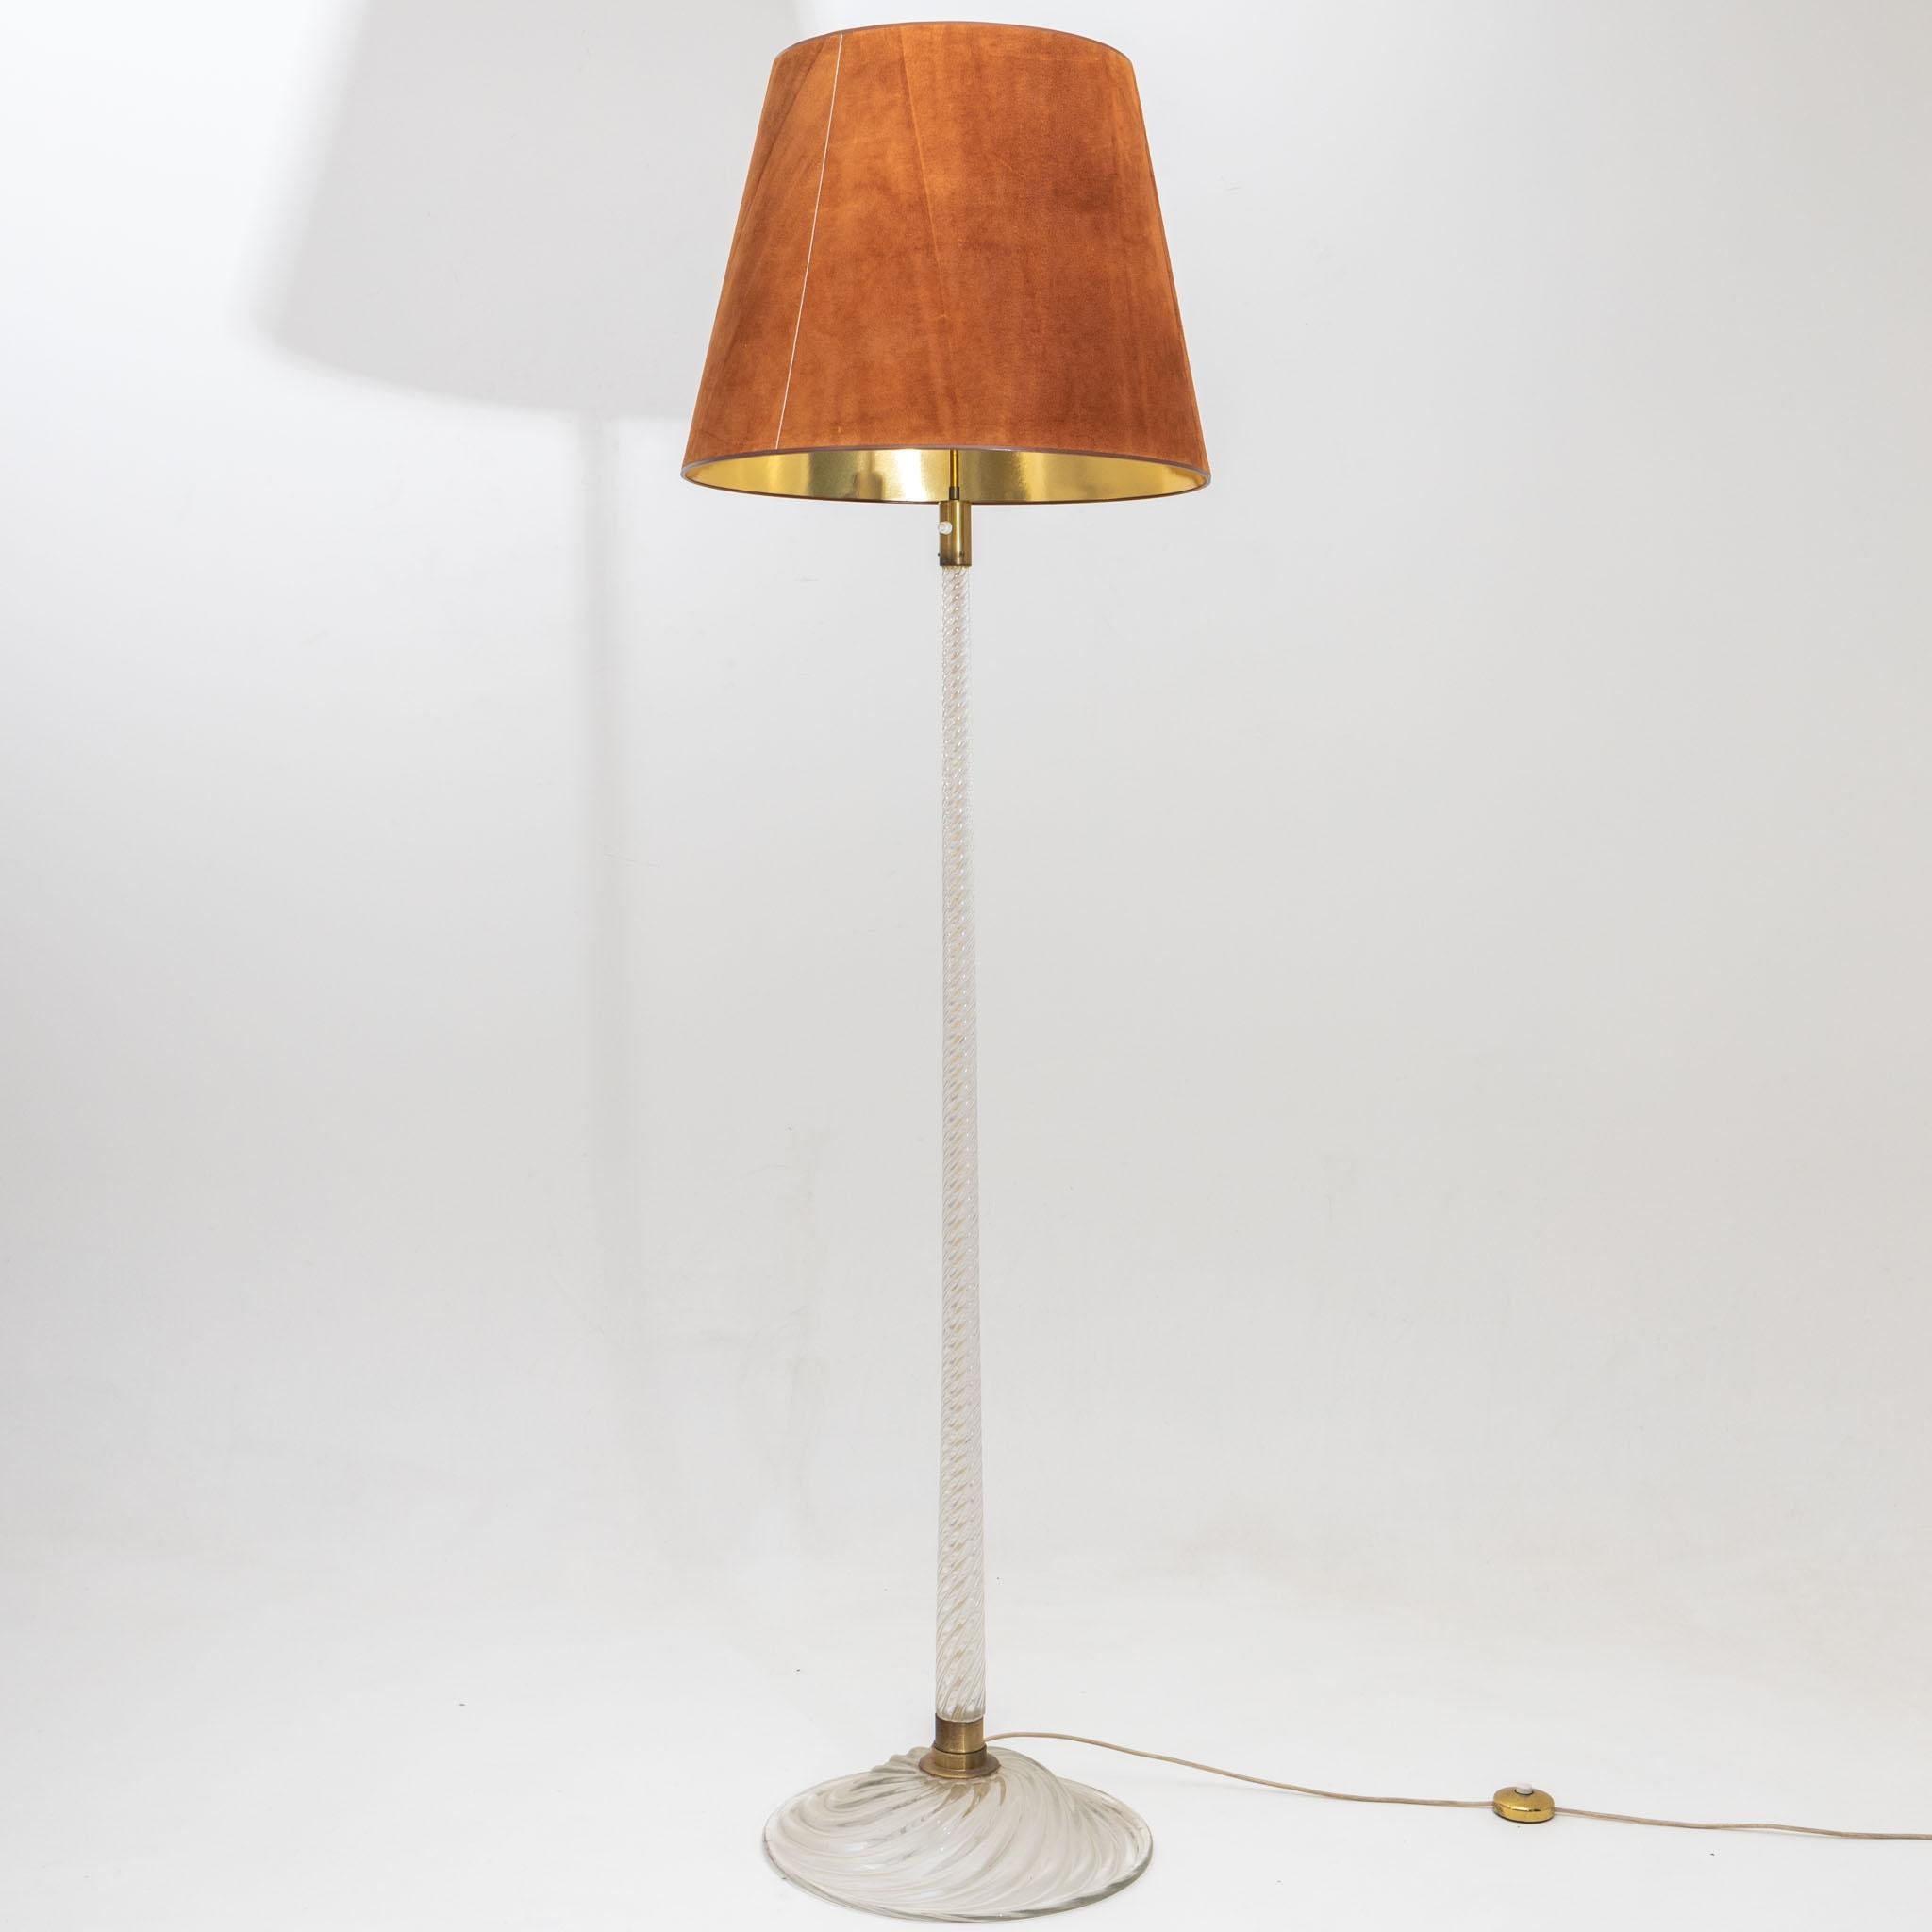 Murano Glass Floor Lamp with Suede Shade by Carlo Scarpa for Venini, Italy 1940s 2